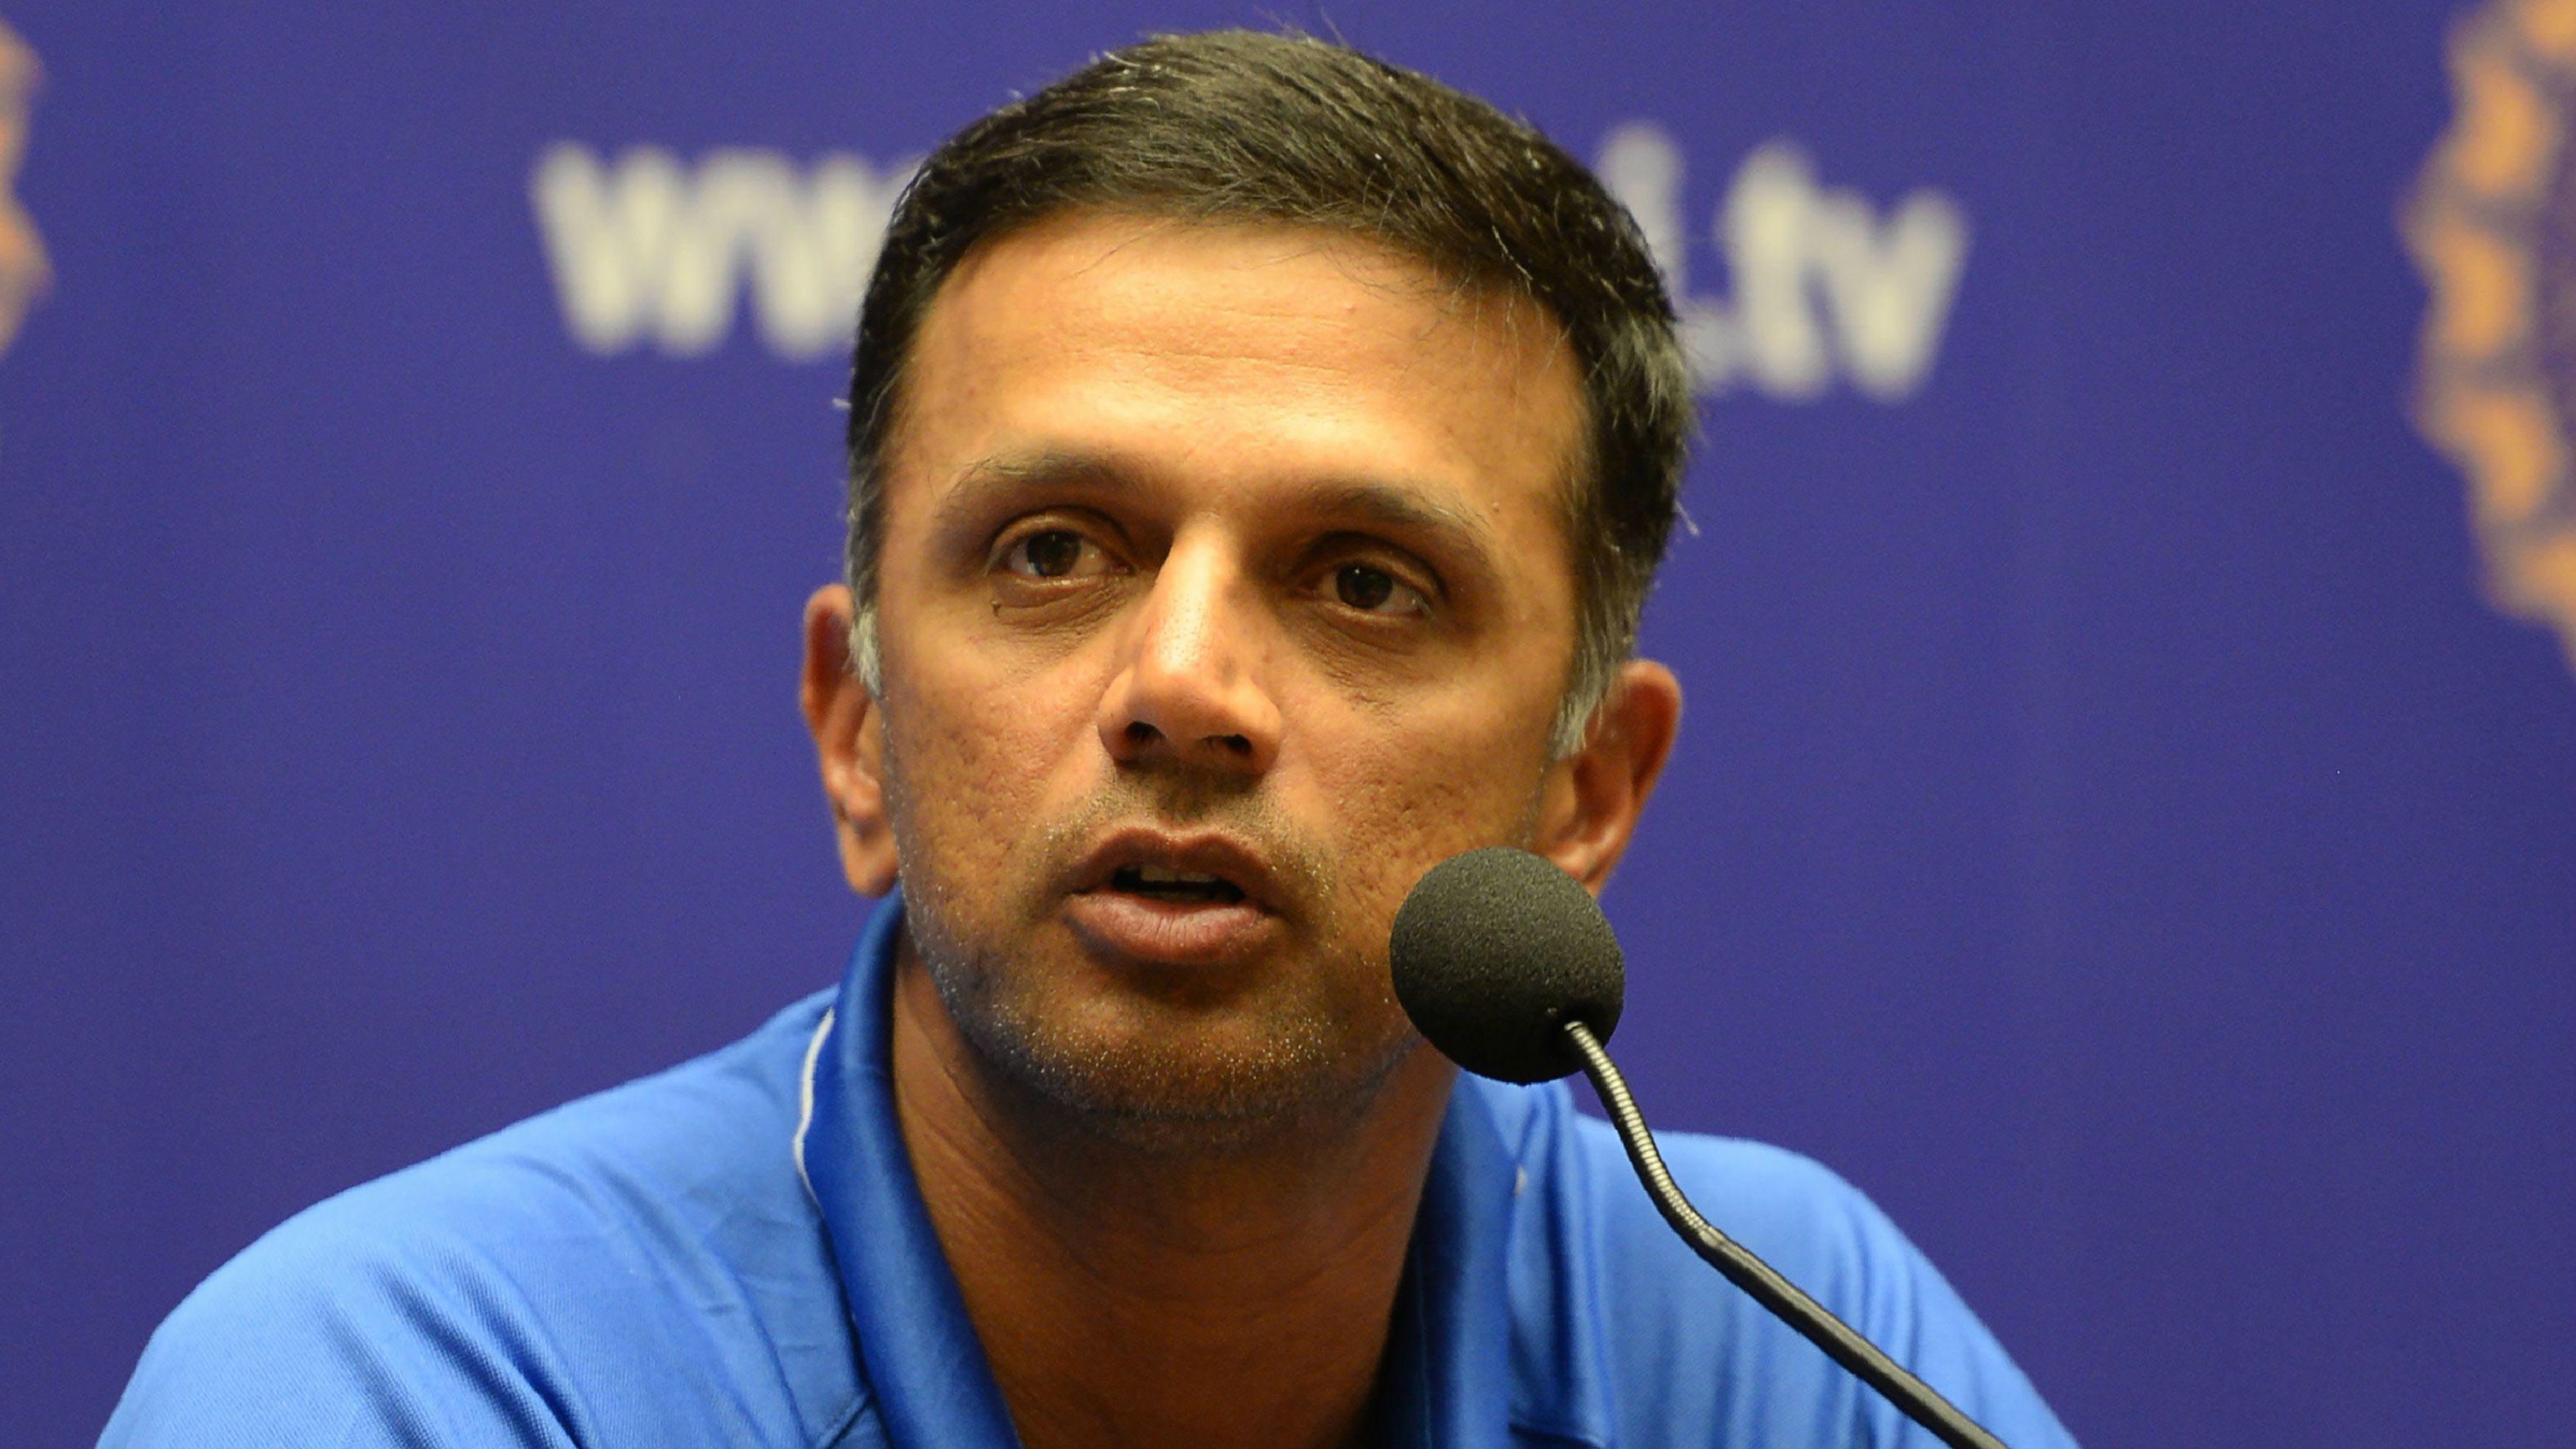 WATCH: When Rahul Dravid turned coy remembering his days as a teenager